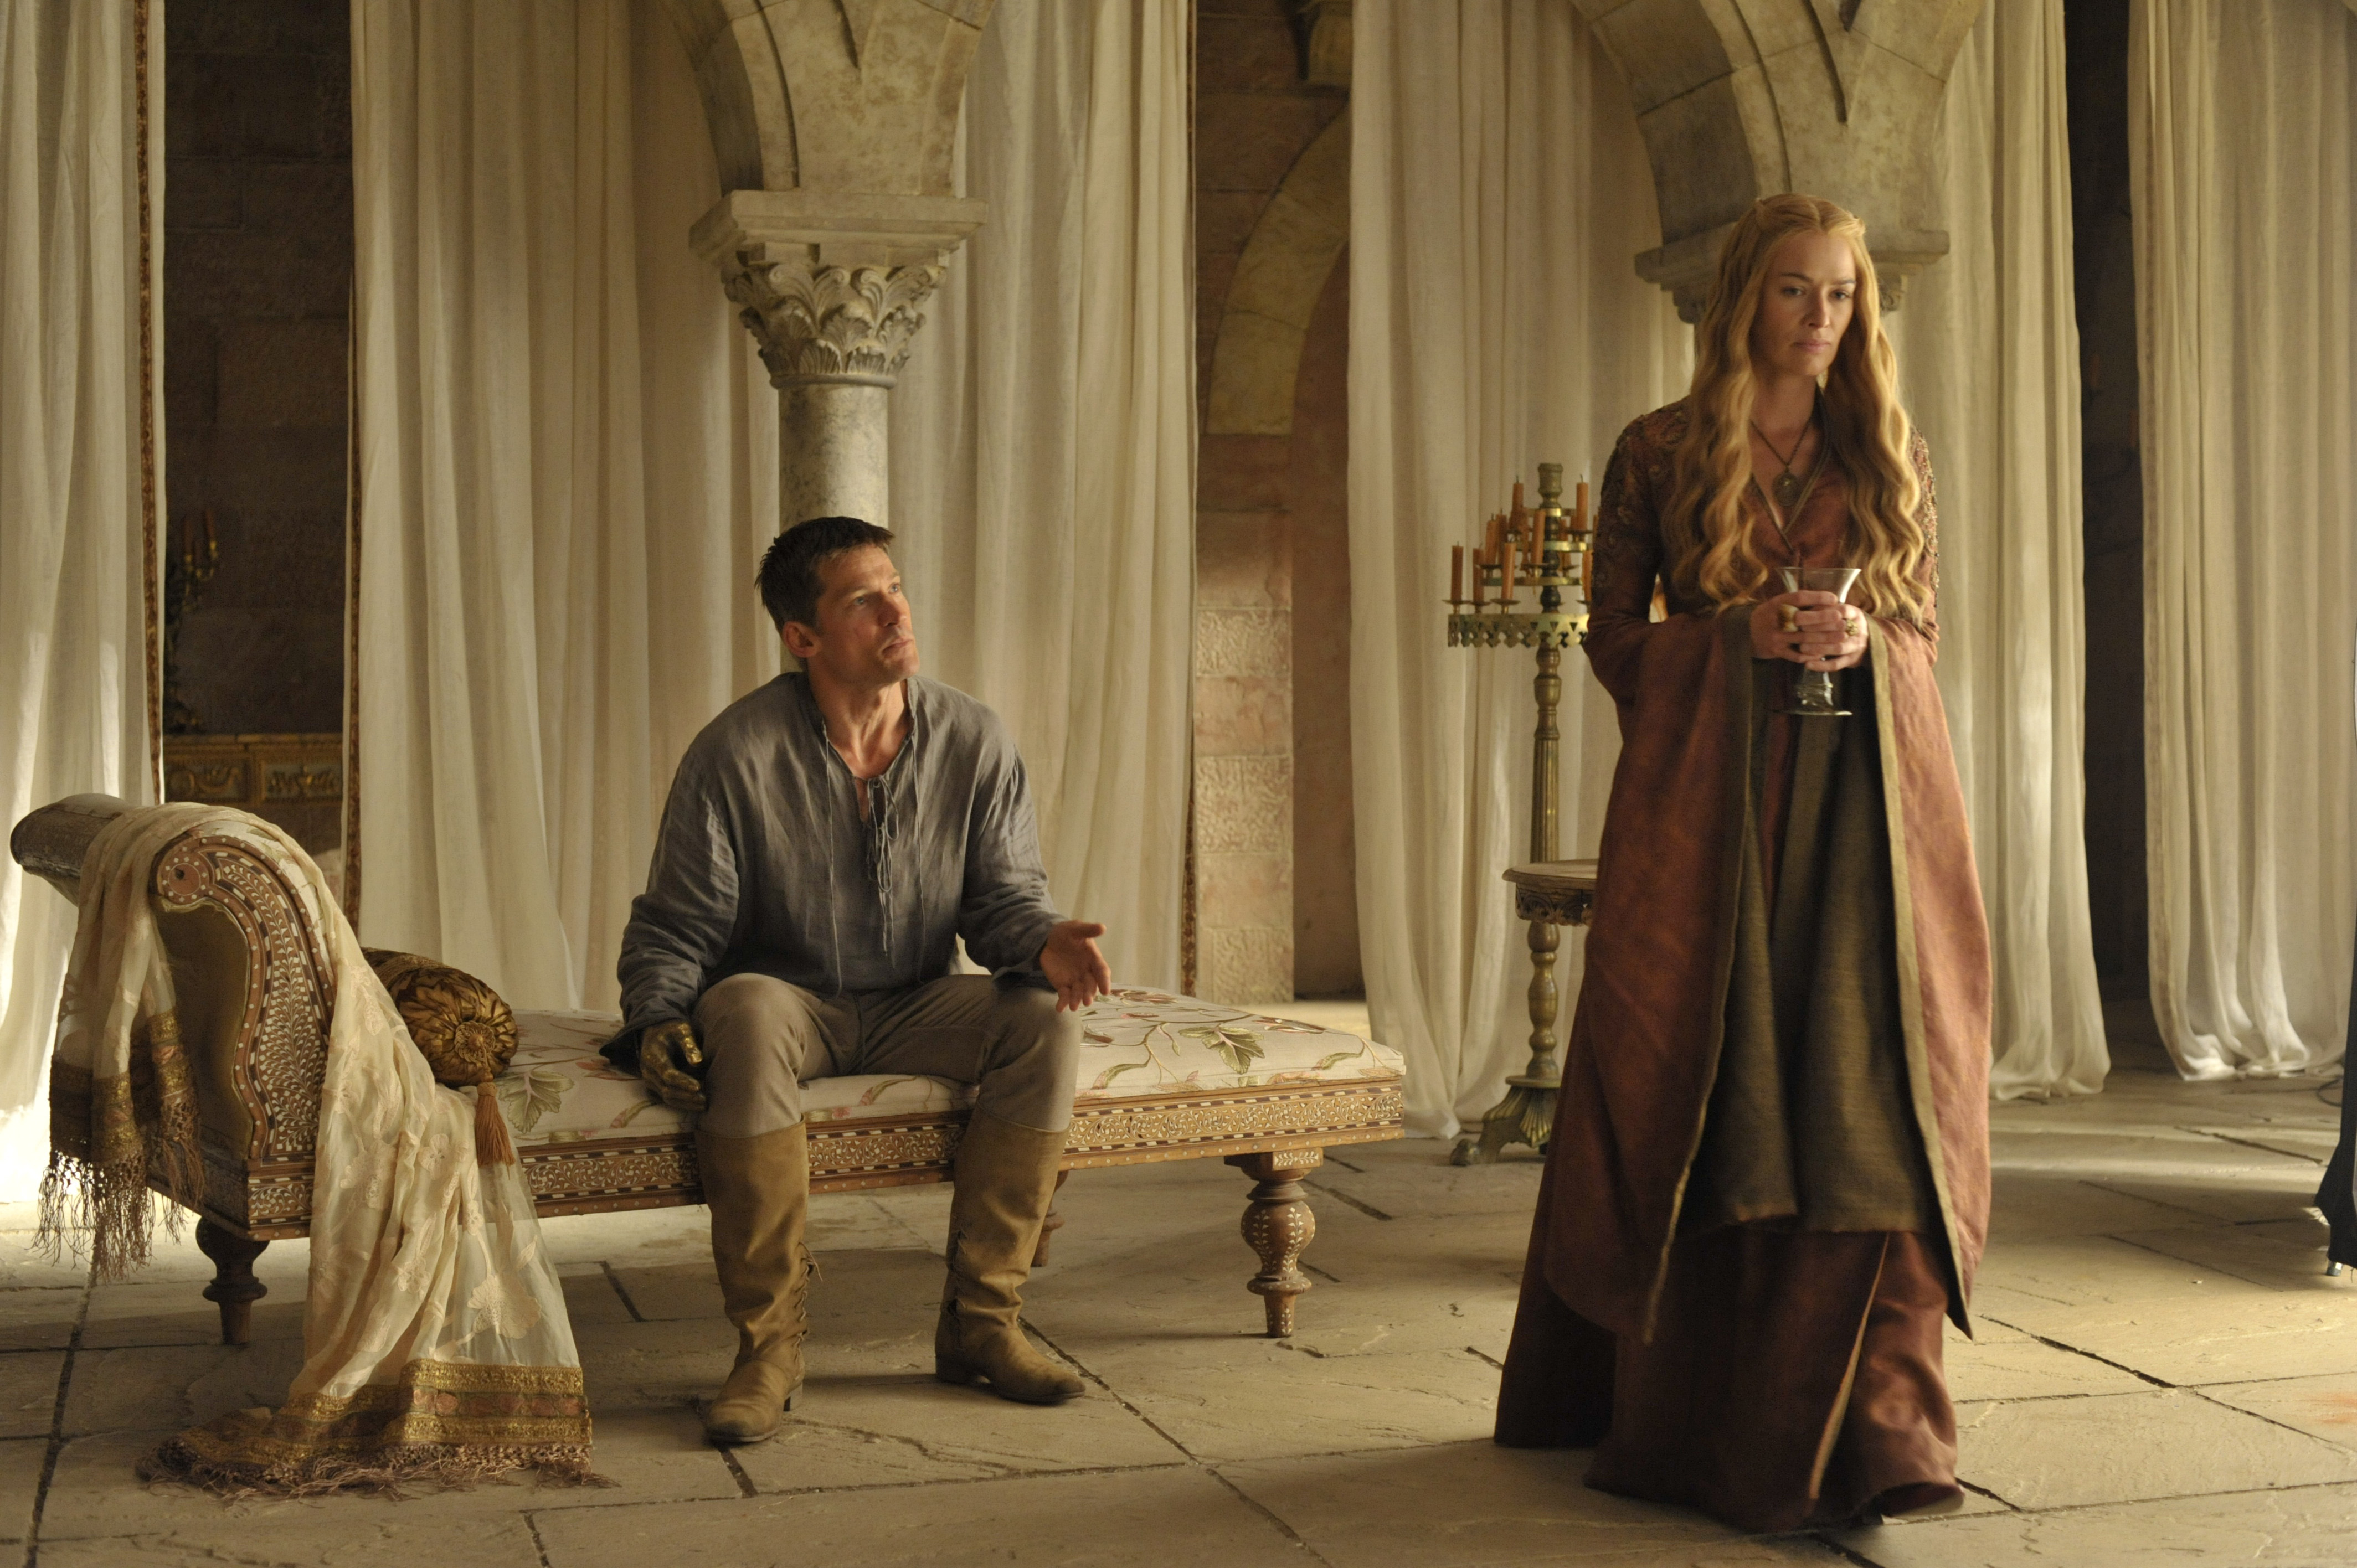 Jaime, played by Nikolaj Coster-Waldau, and Cersei, played by Lena Headey, in <i>Game of Thrones</i> (HBO)